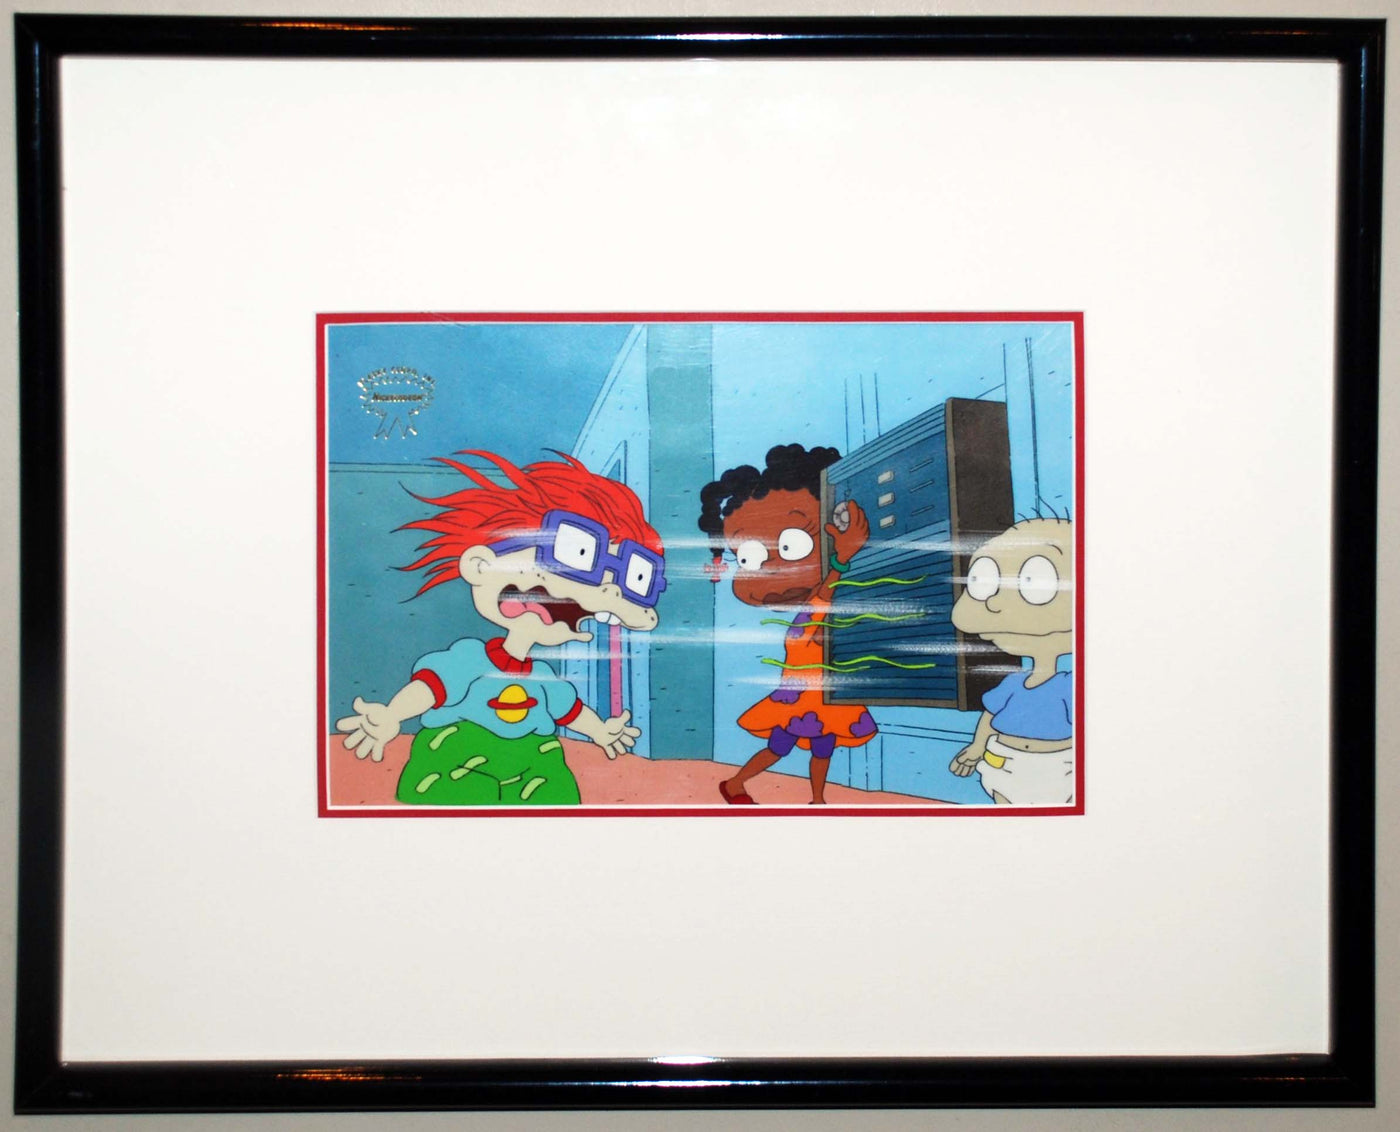 Original Rugrats Production Cel featuring Chucky, Susie and Tommy